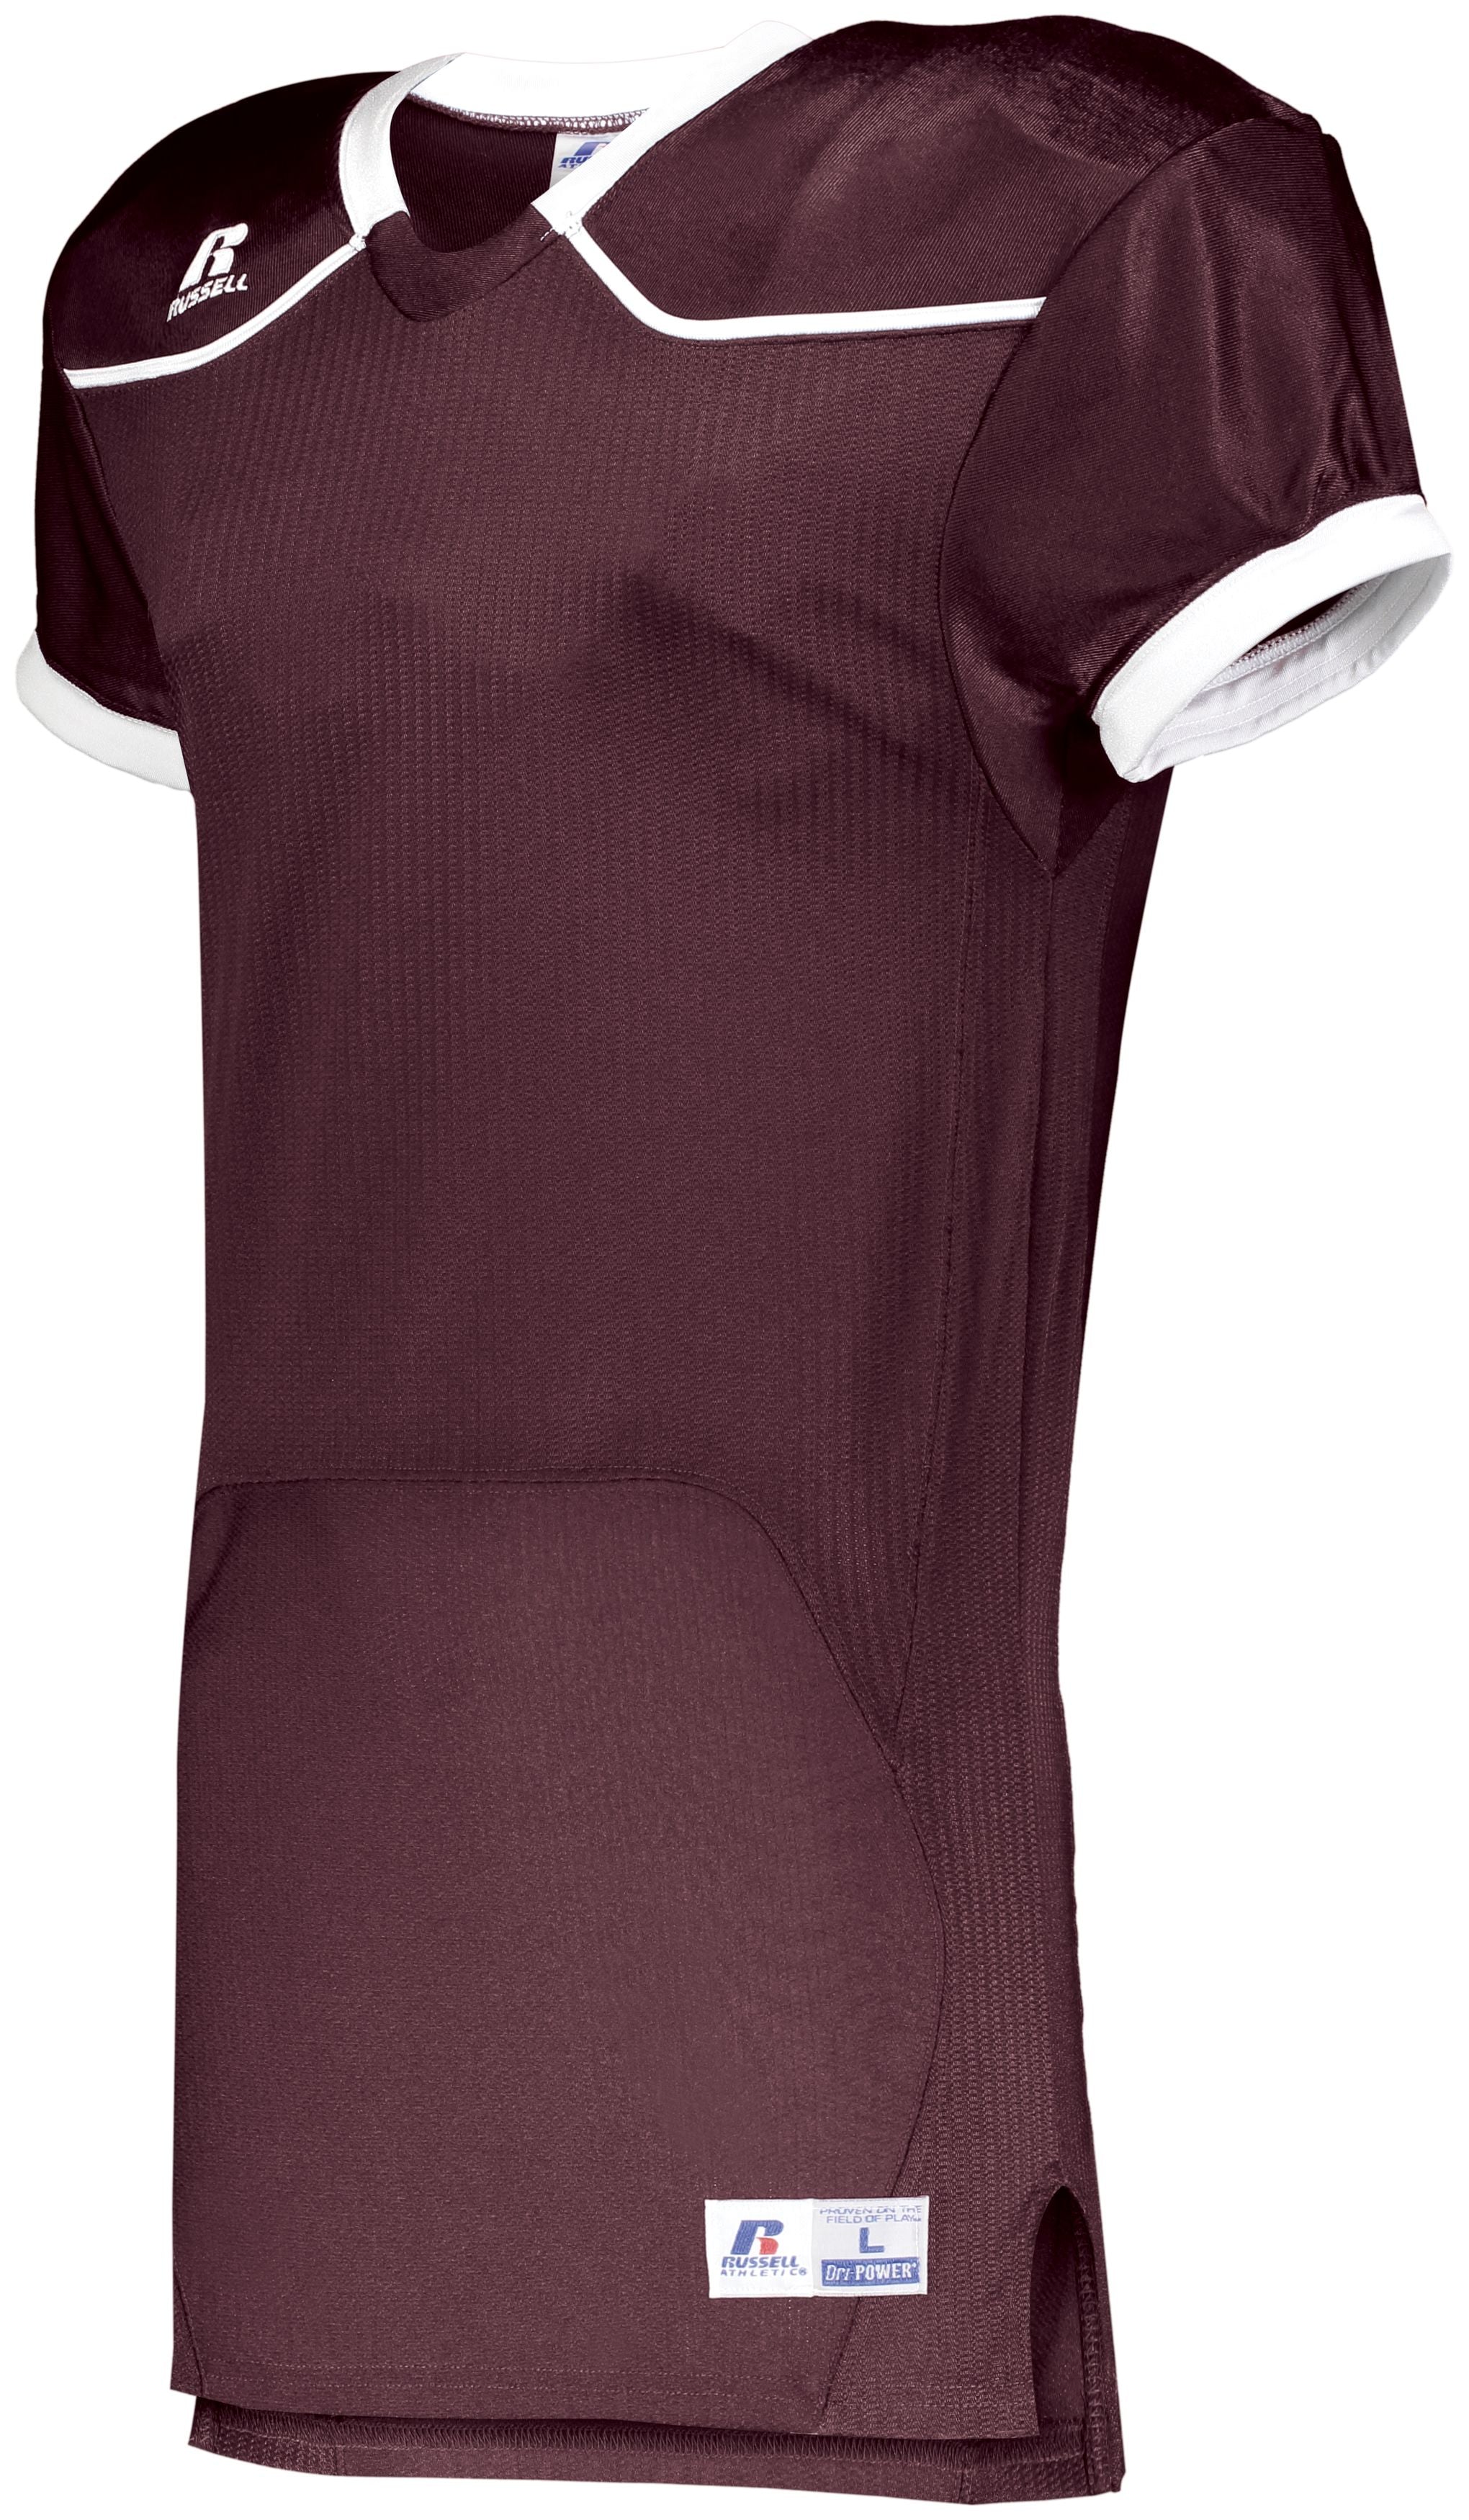 Russell Athletic Color Block Game Jersey (Home) in Maroon/White  -Part of the Adult, Adult-Jersey, Football, Russell-Athletic-Products, Shirts, All-Sports, All-Sports-1 product lines at KanaleyCreations.com